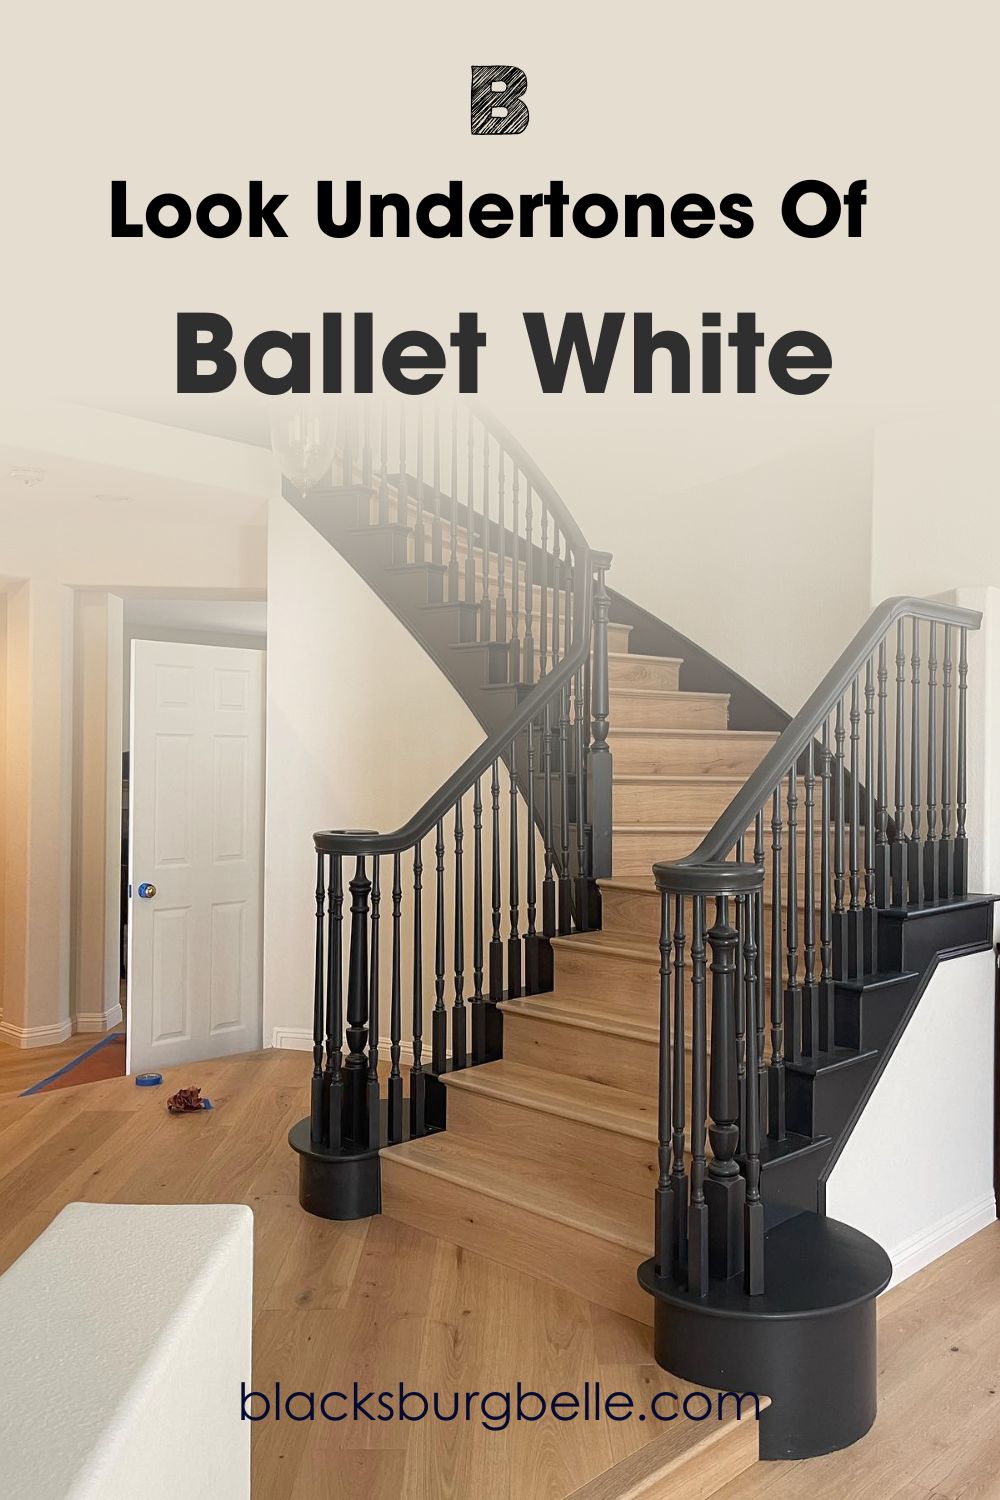 A Closer Look at the Undertones of Ballet White